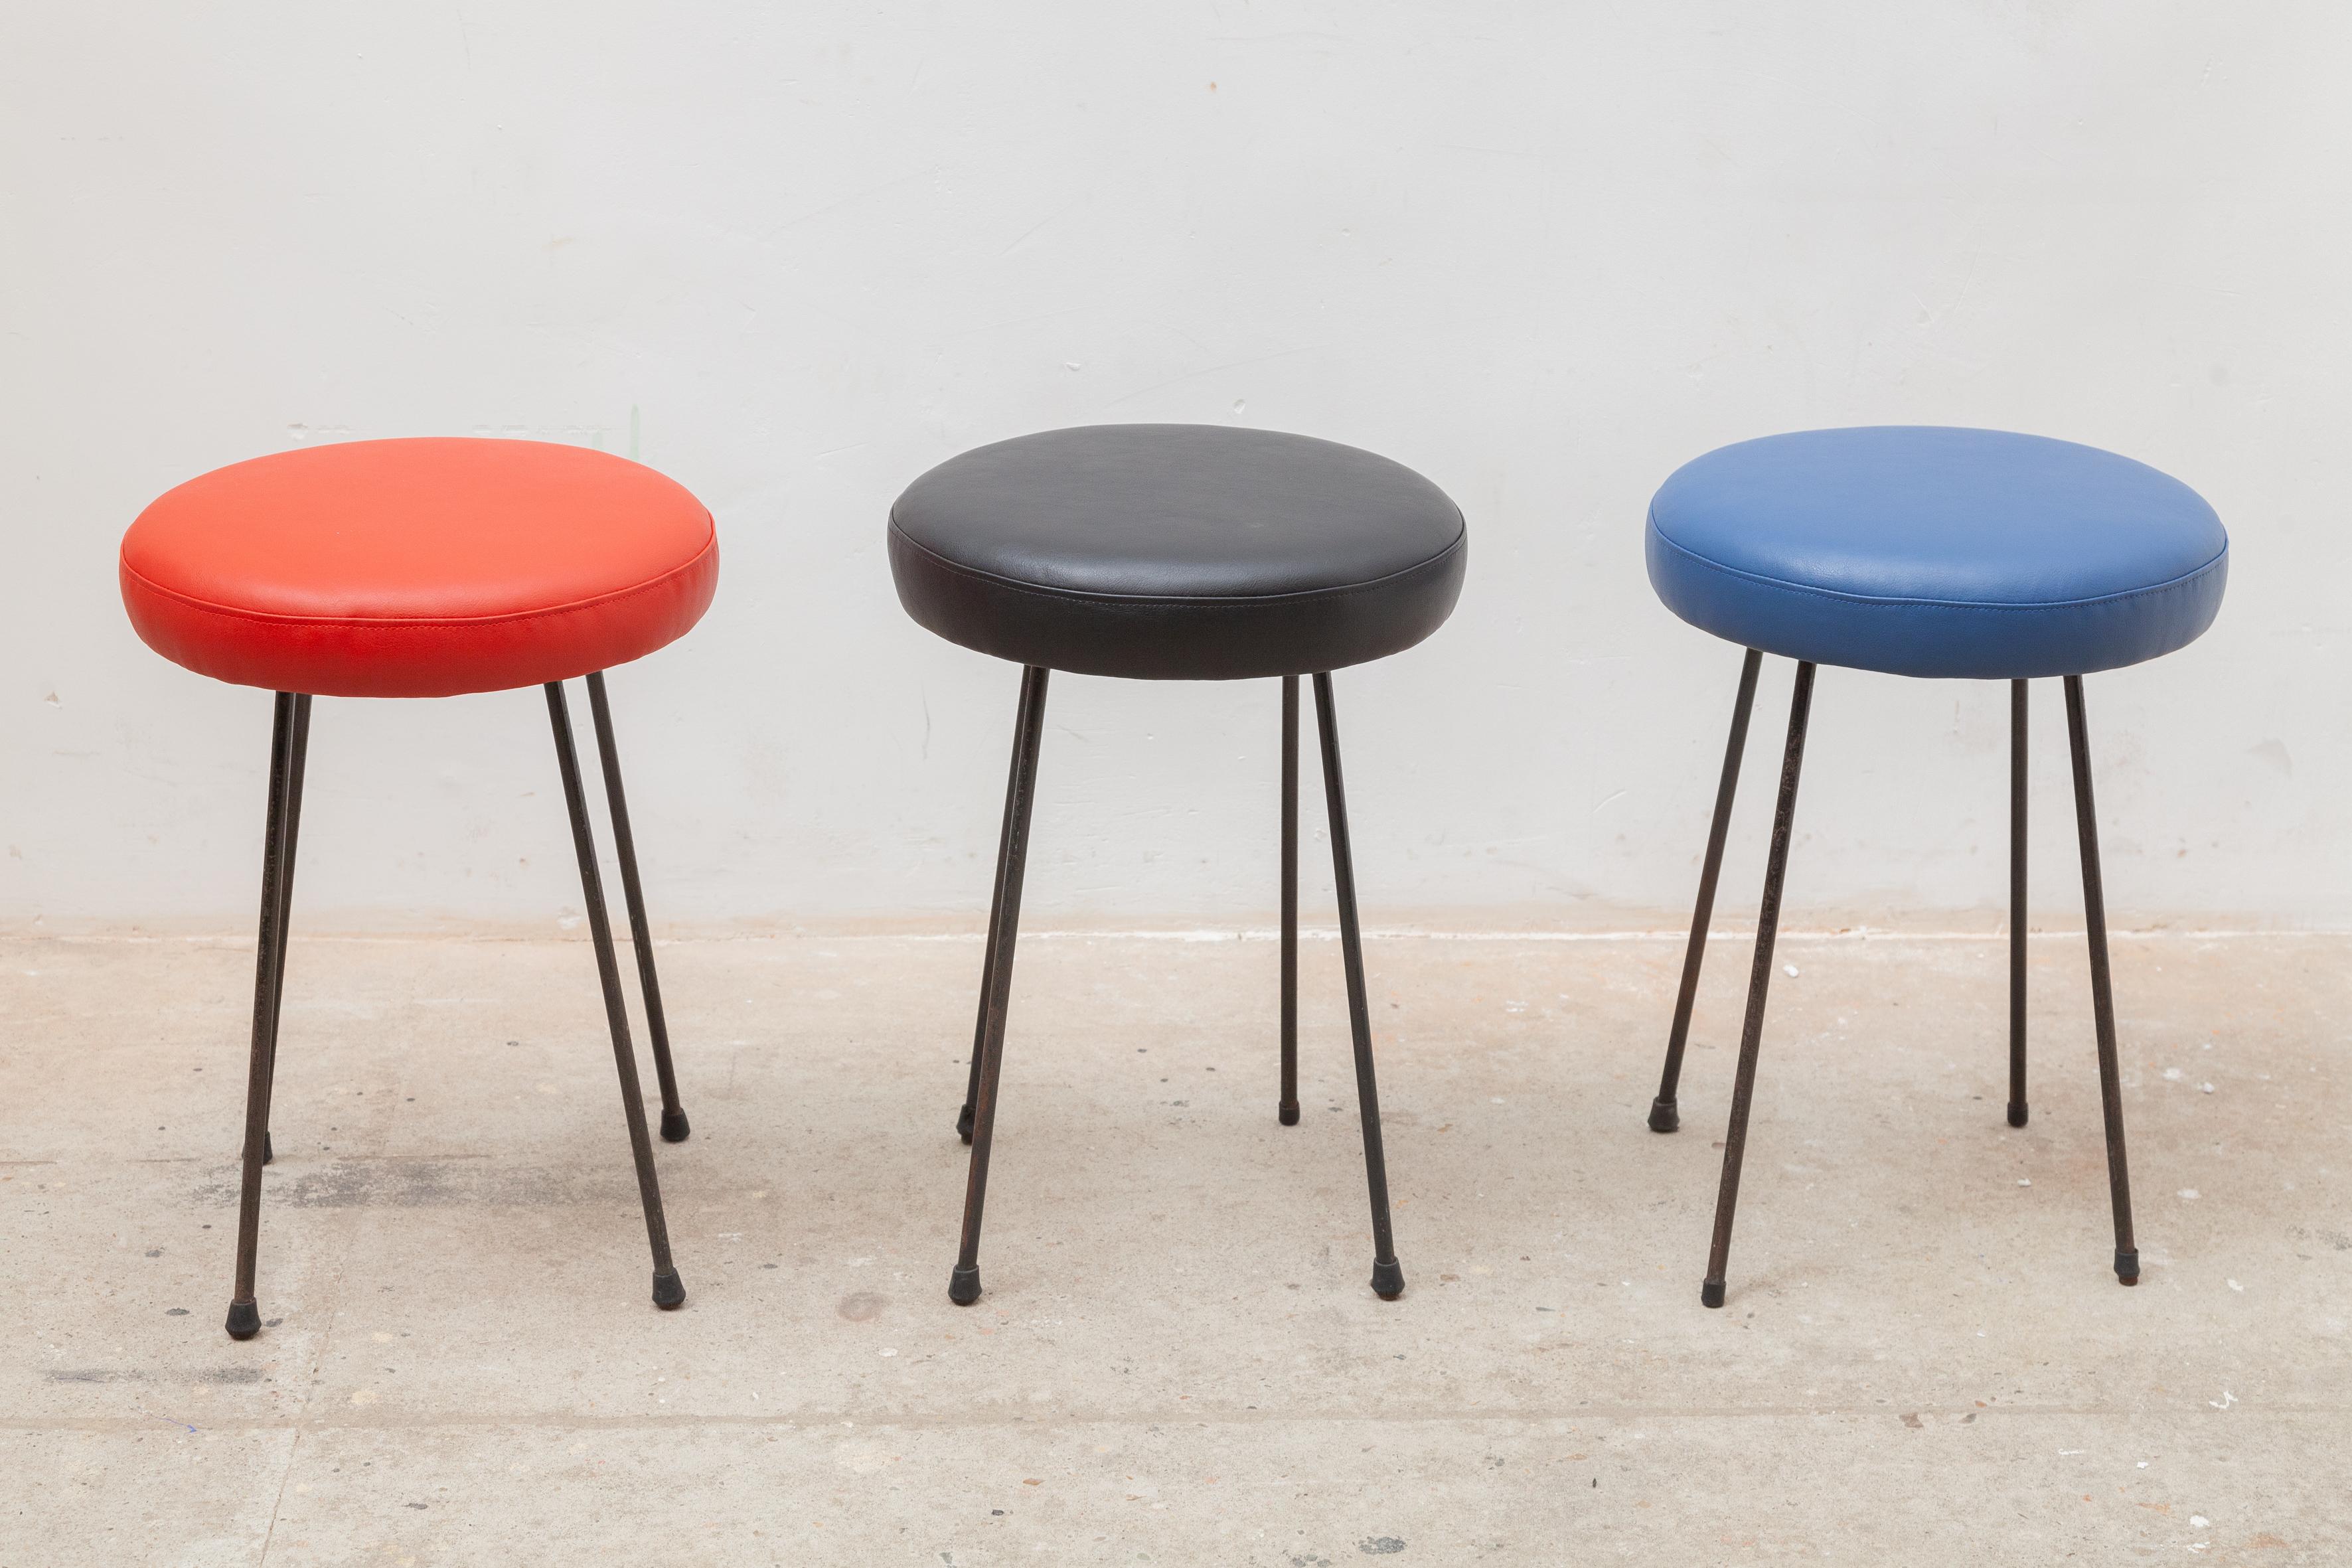 Midcentury Modern fifties set of three stools with new leather upholstery seats in the colors red, blue and black at iron legs. Very stable and a nice accent in your interior.